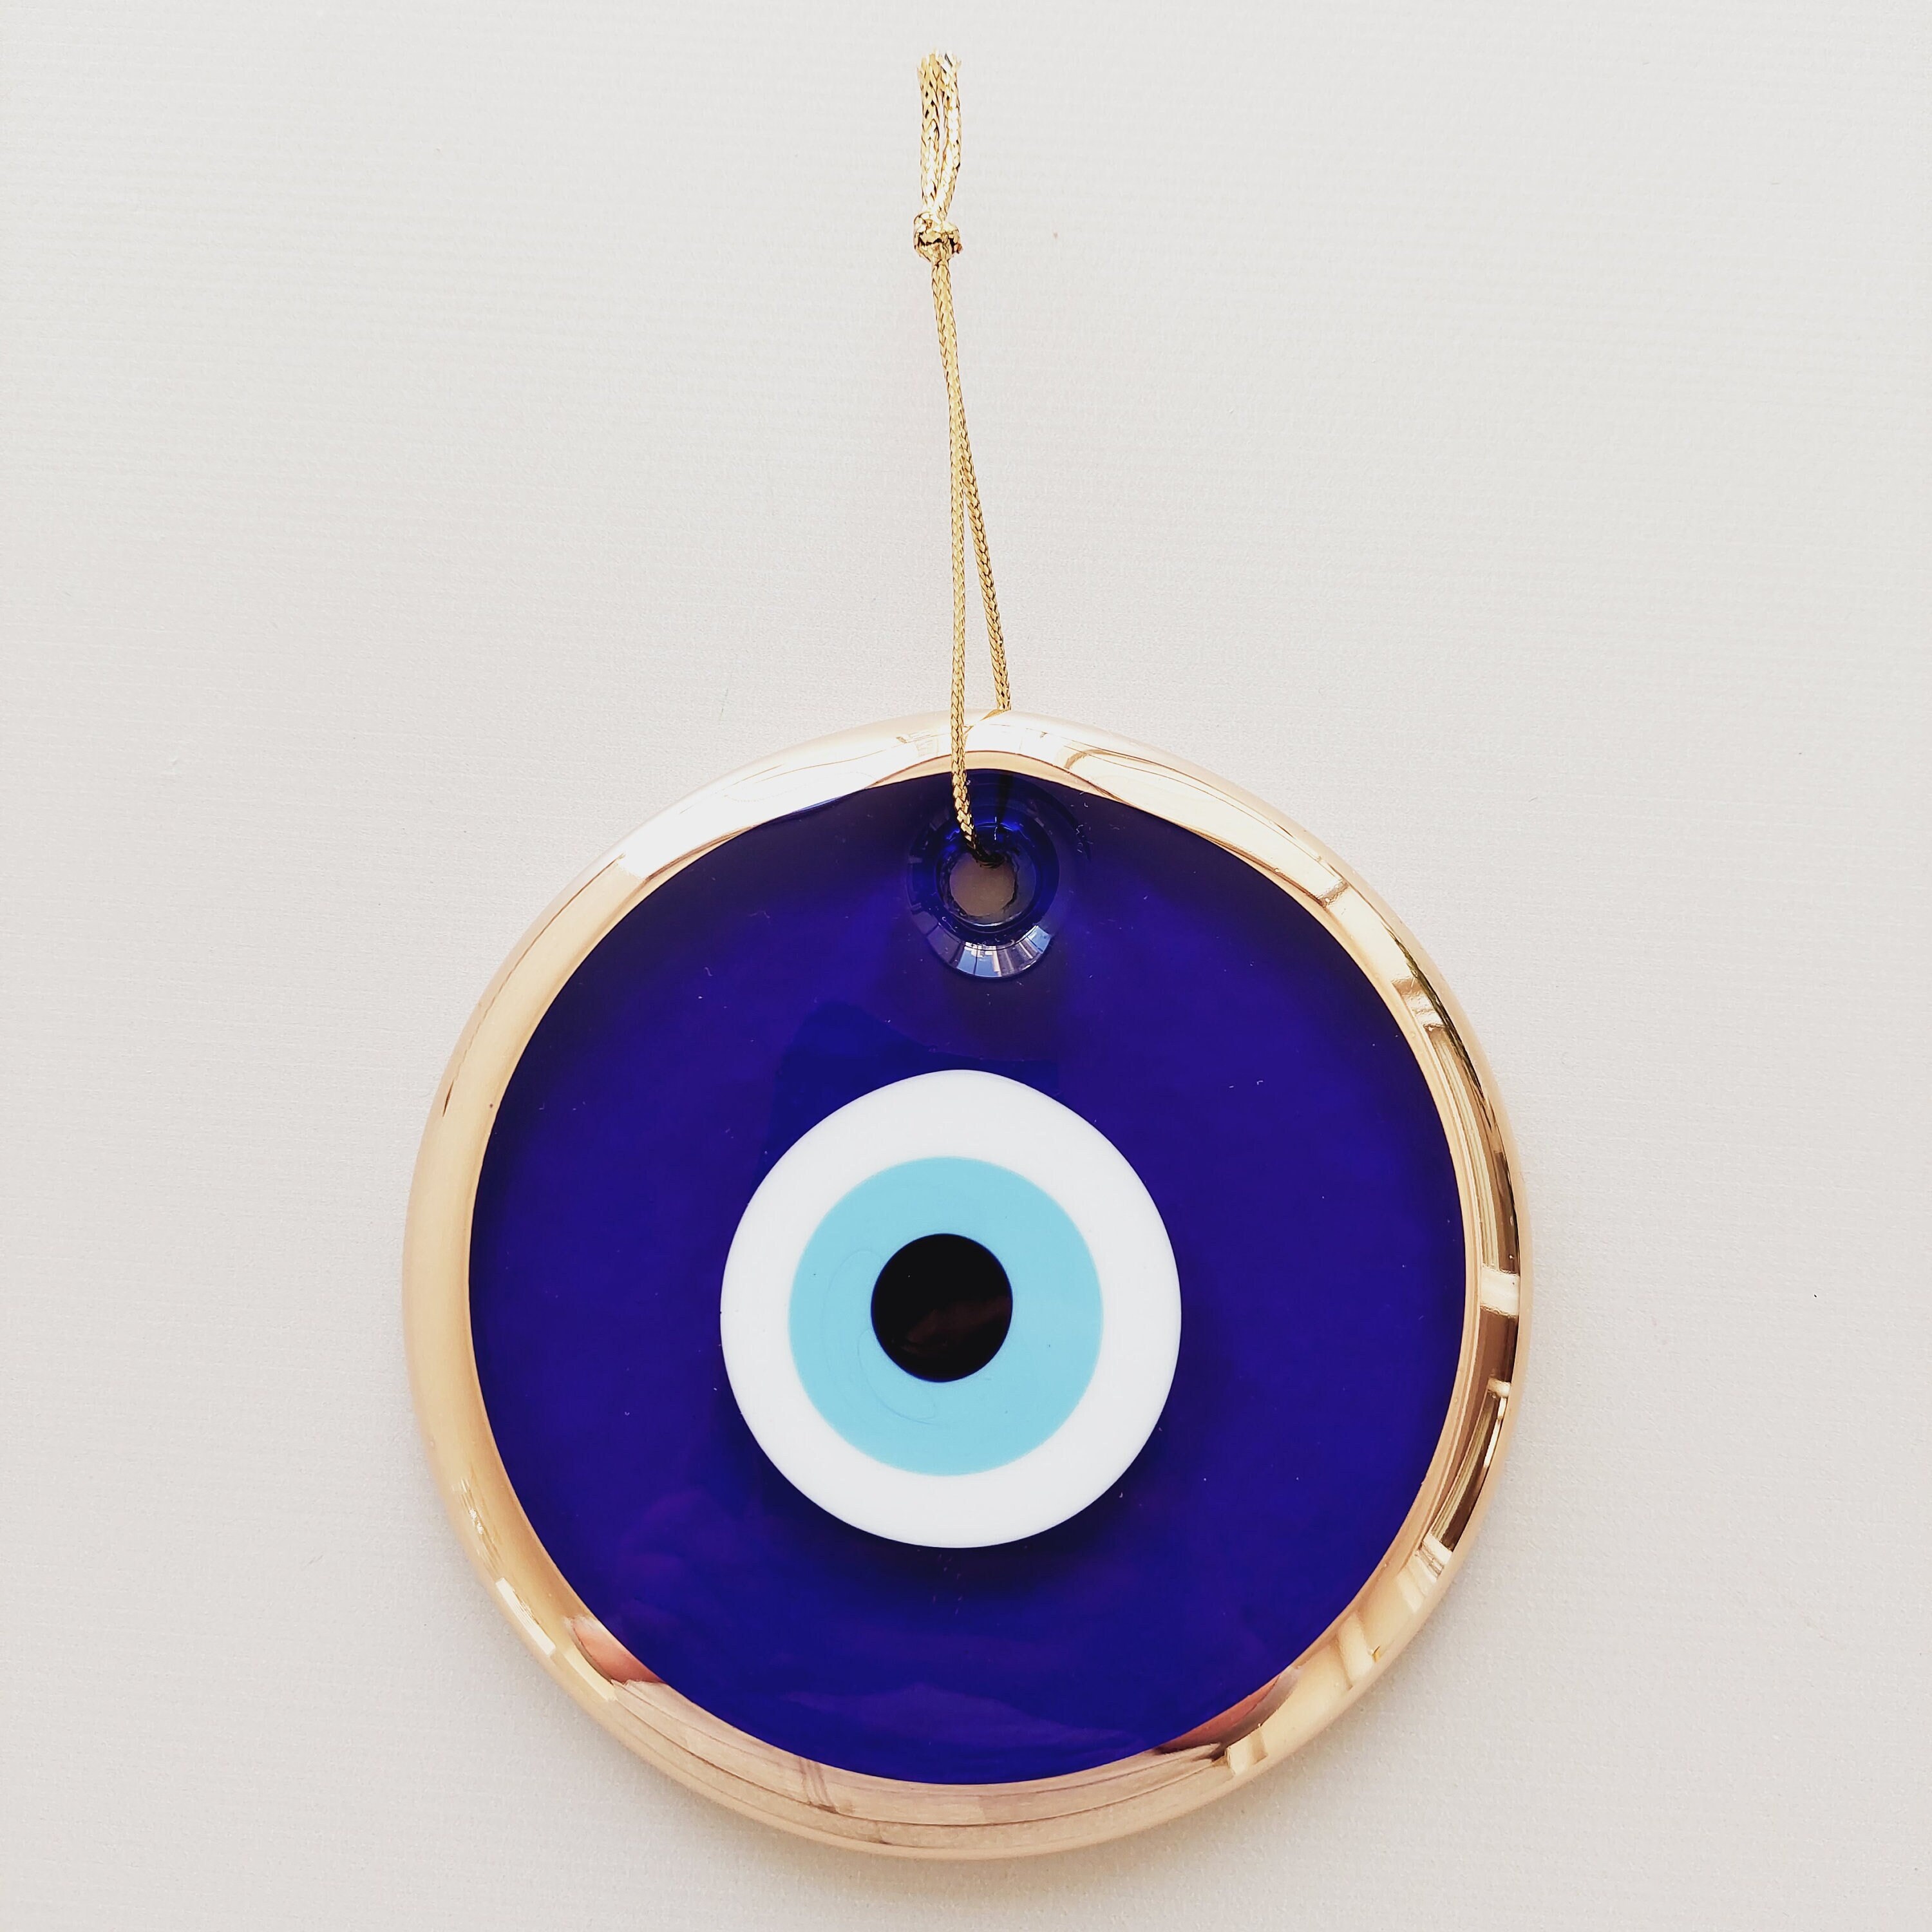 Evil Eye Glass Wall Hanging Decor Golden Moon Design Hand Painted Ornament Home Protection Nazar Amulet Lucky Charm Large 